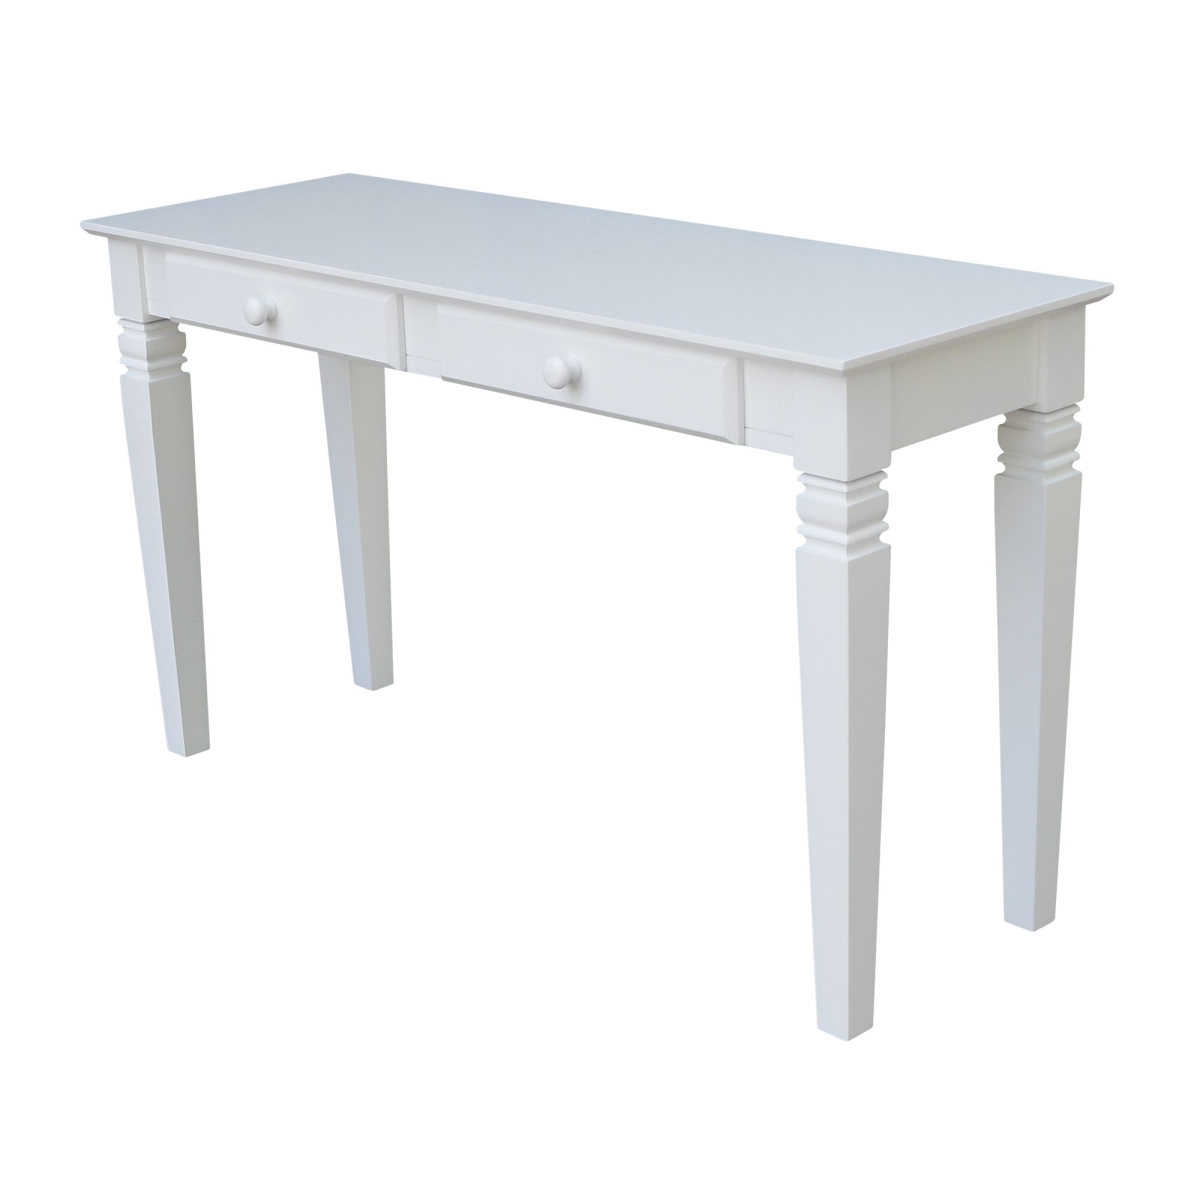 Ot08-60s2 Java Console Table With 2 Drawers, White